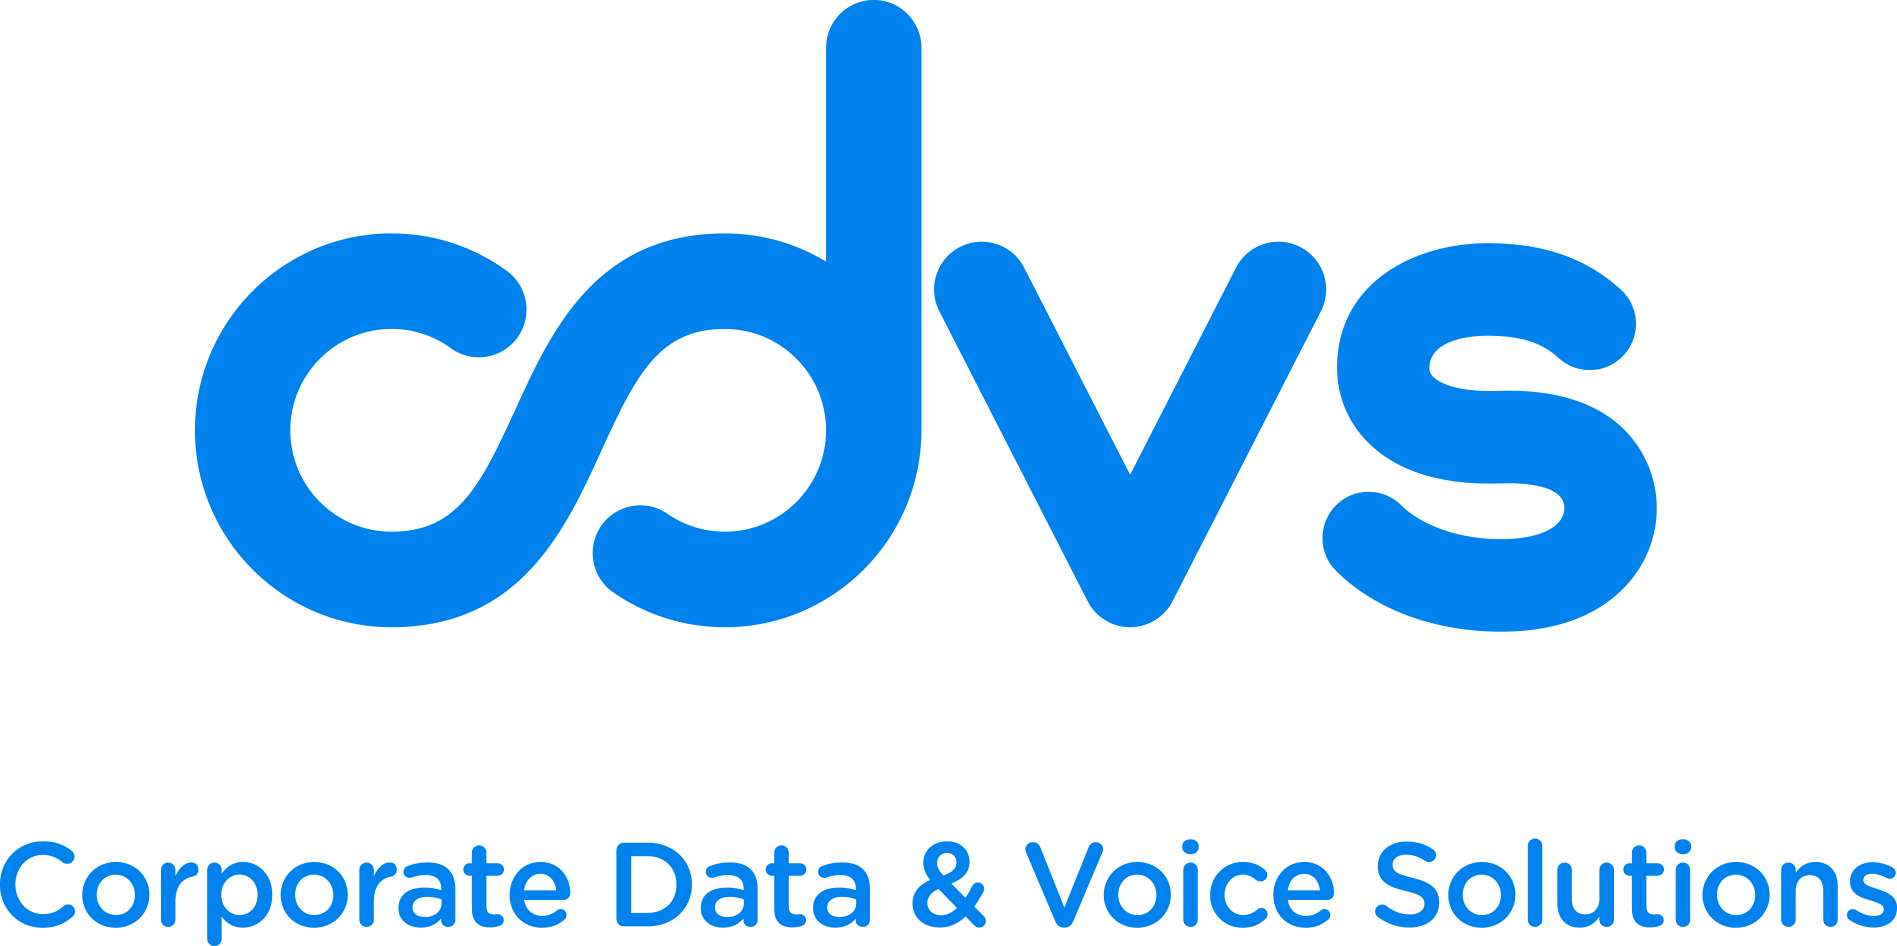 Corporate Data & Voice Solutions